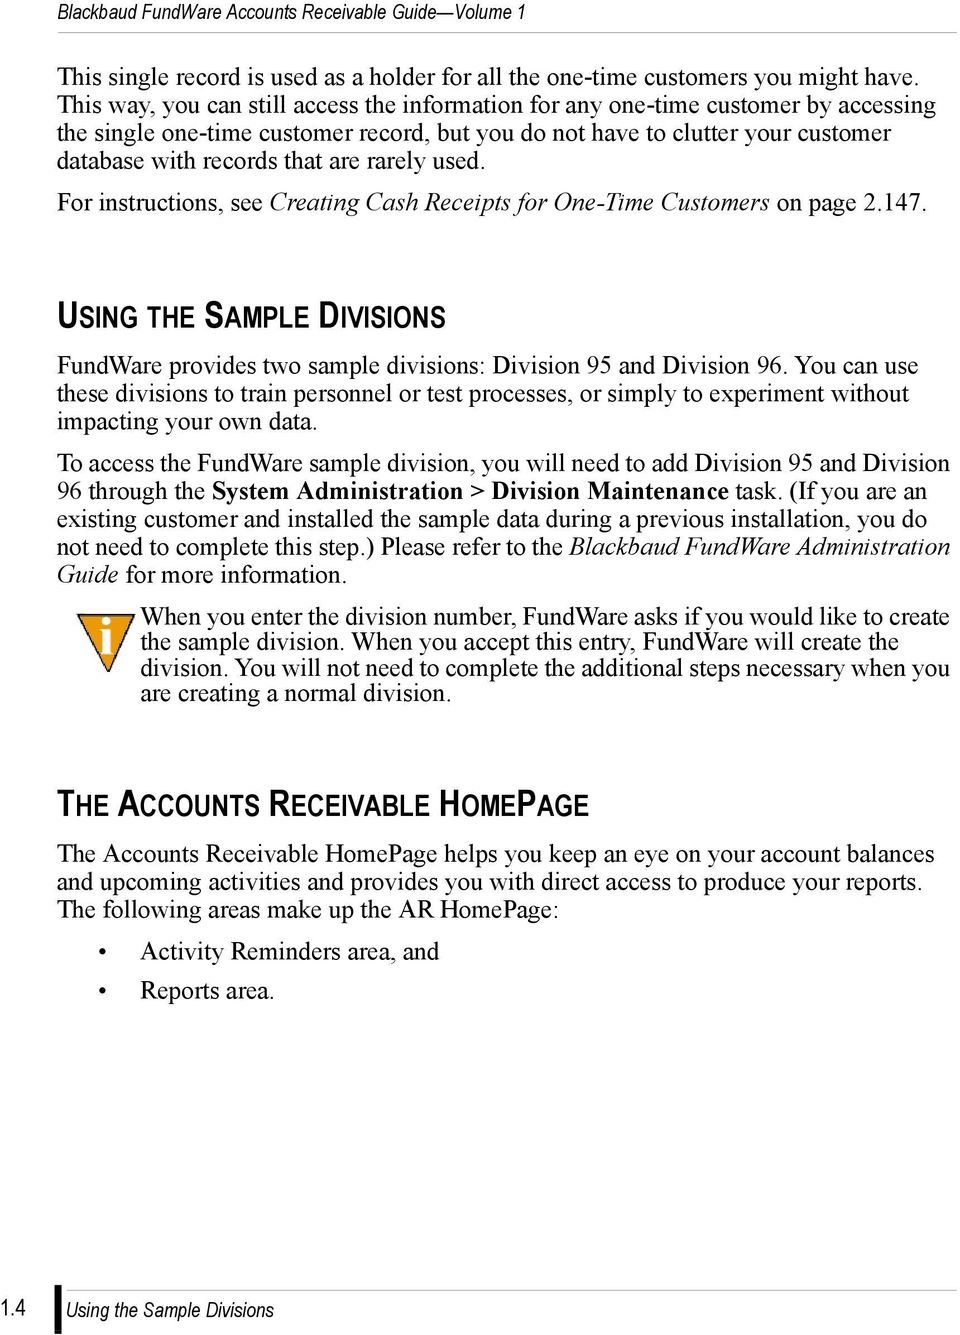 rarely used. For instructions, see Creating Cash Receipts for One-Time Customers on page 2.147. USING THE SAMPLE DIVISIONS FundWare provides two sample divisions: Division 95 and Division 96.